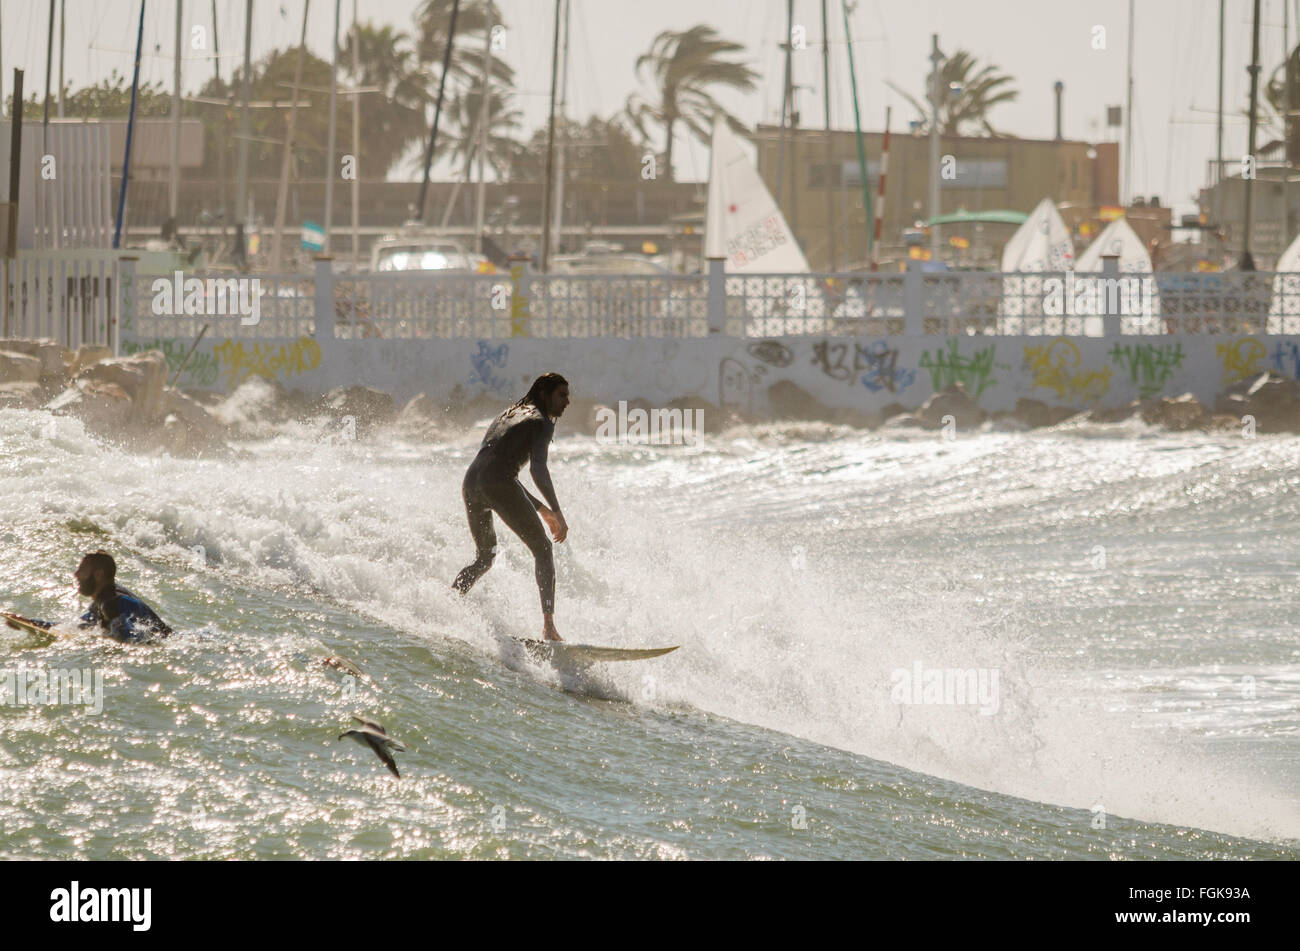 Fuengirola, Malaga, Andalusia, Spain. 20th February, 2016. Code orange is given for high waves and wind. Surfer takes advantage of high waves. Credit:  Perry van Munster/ Alamy Live News Stock Photo